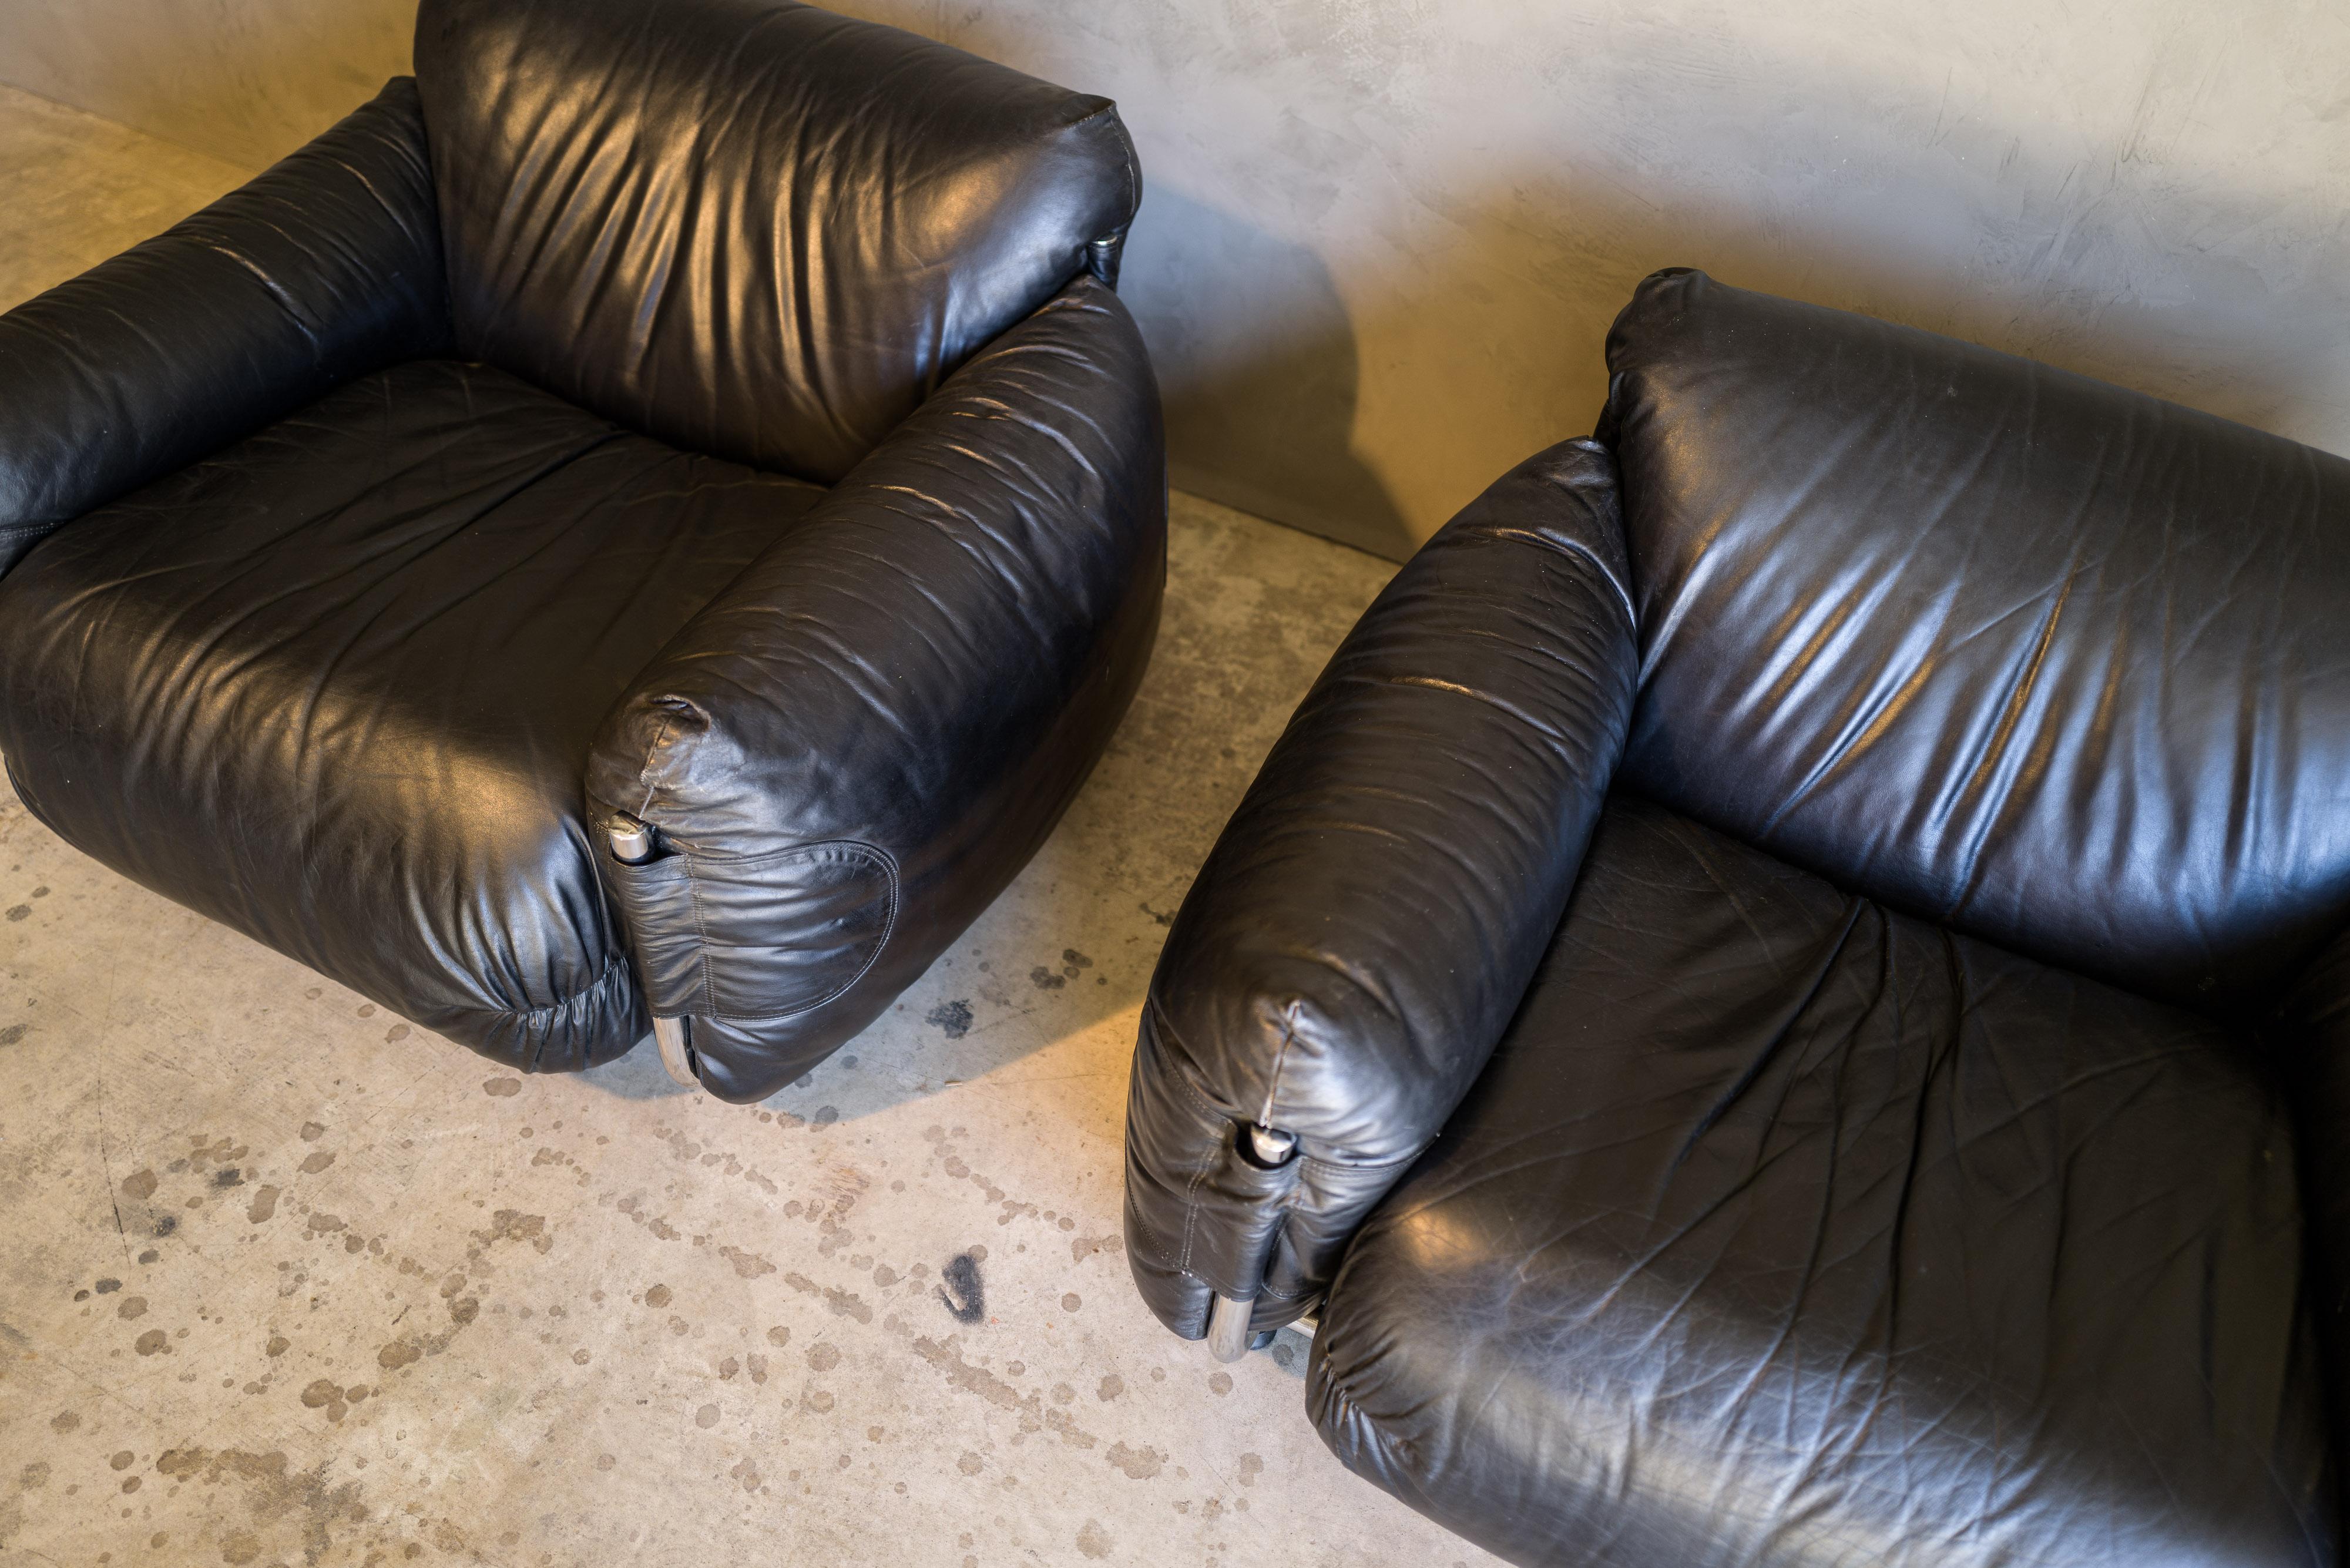 Vintage pair of lounge chairs designed by G. Munari for Poltrona Munari, 1970s. Original black leather upholstery with light patina and wear. Extremely comfortable. Original makers mark on the underside of the chairs.